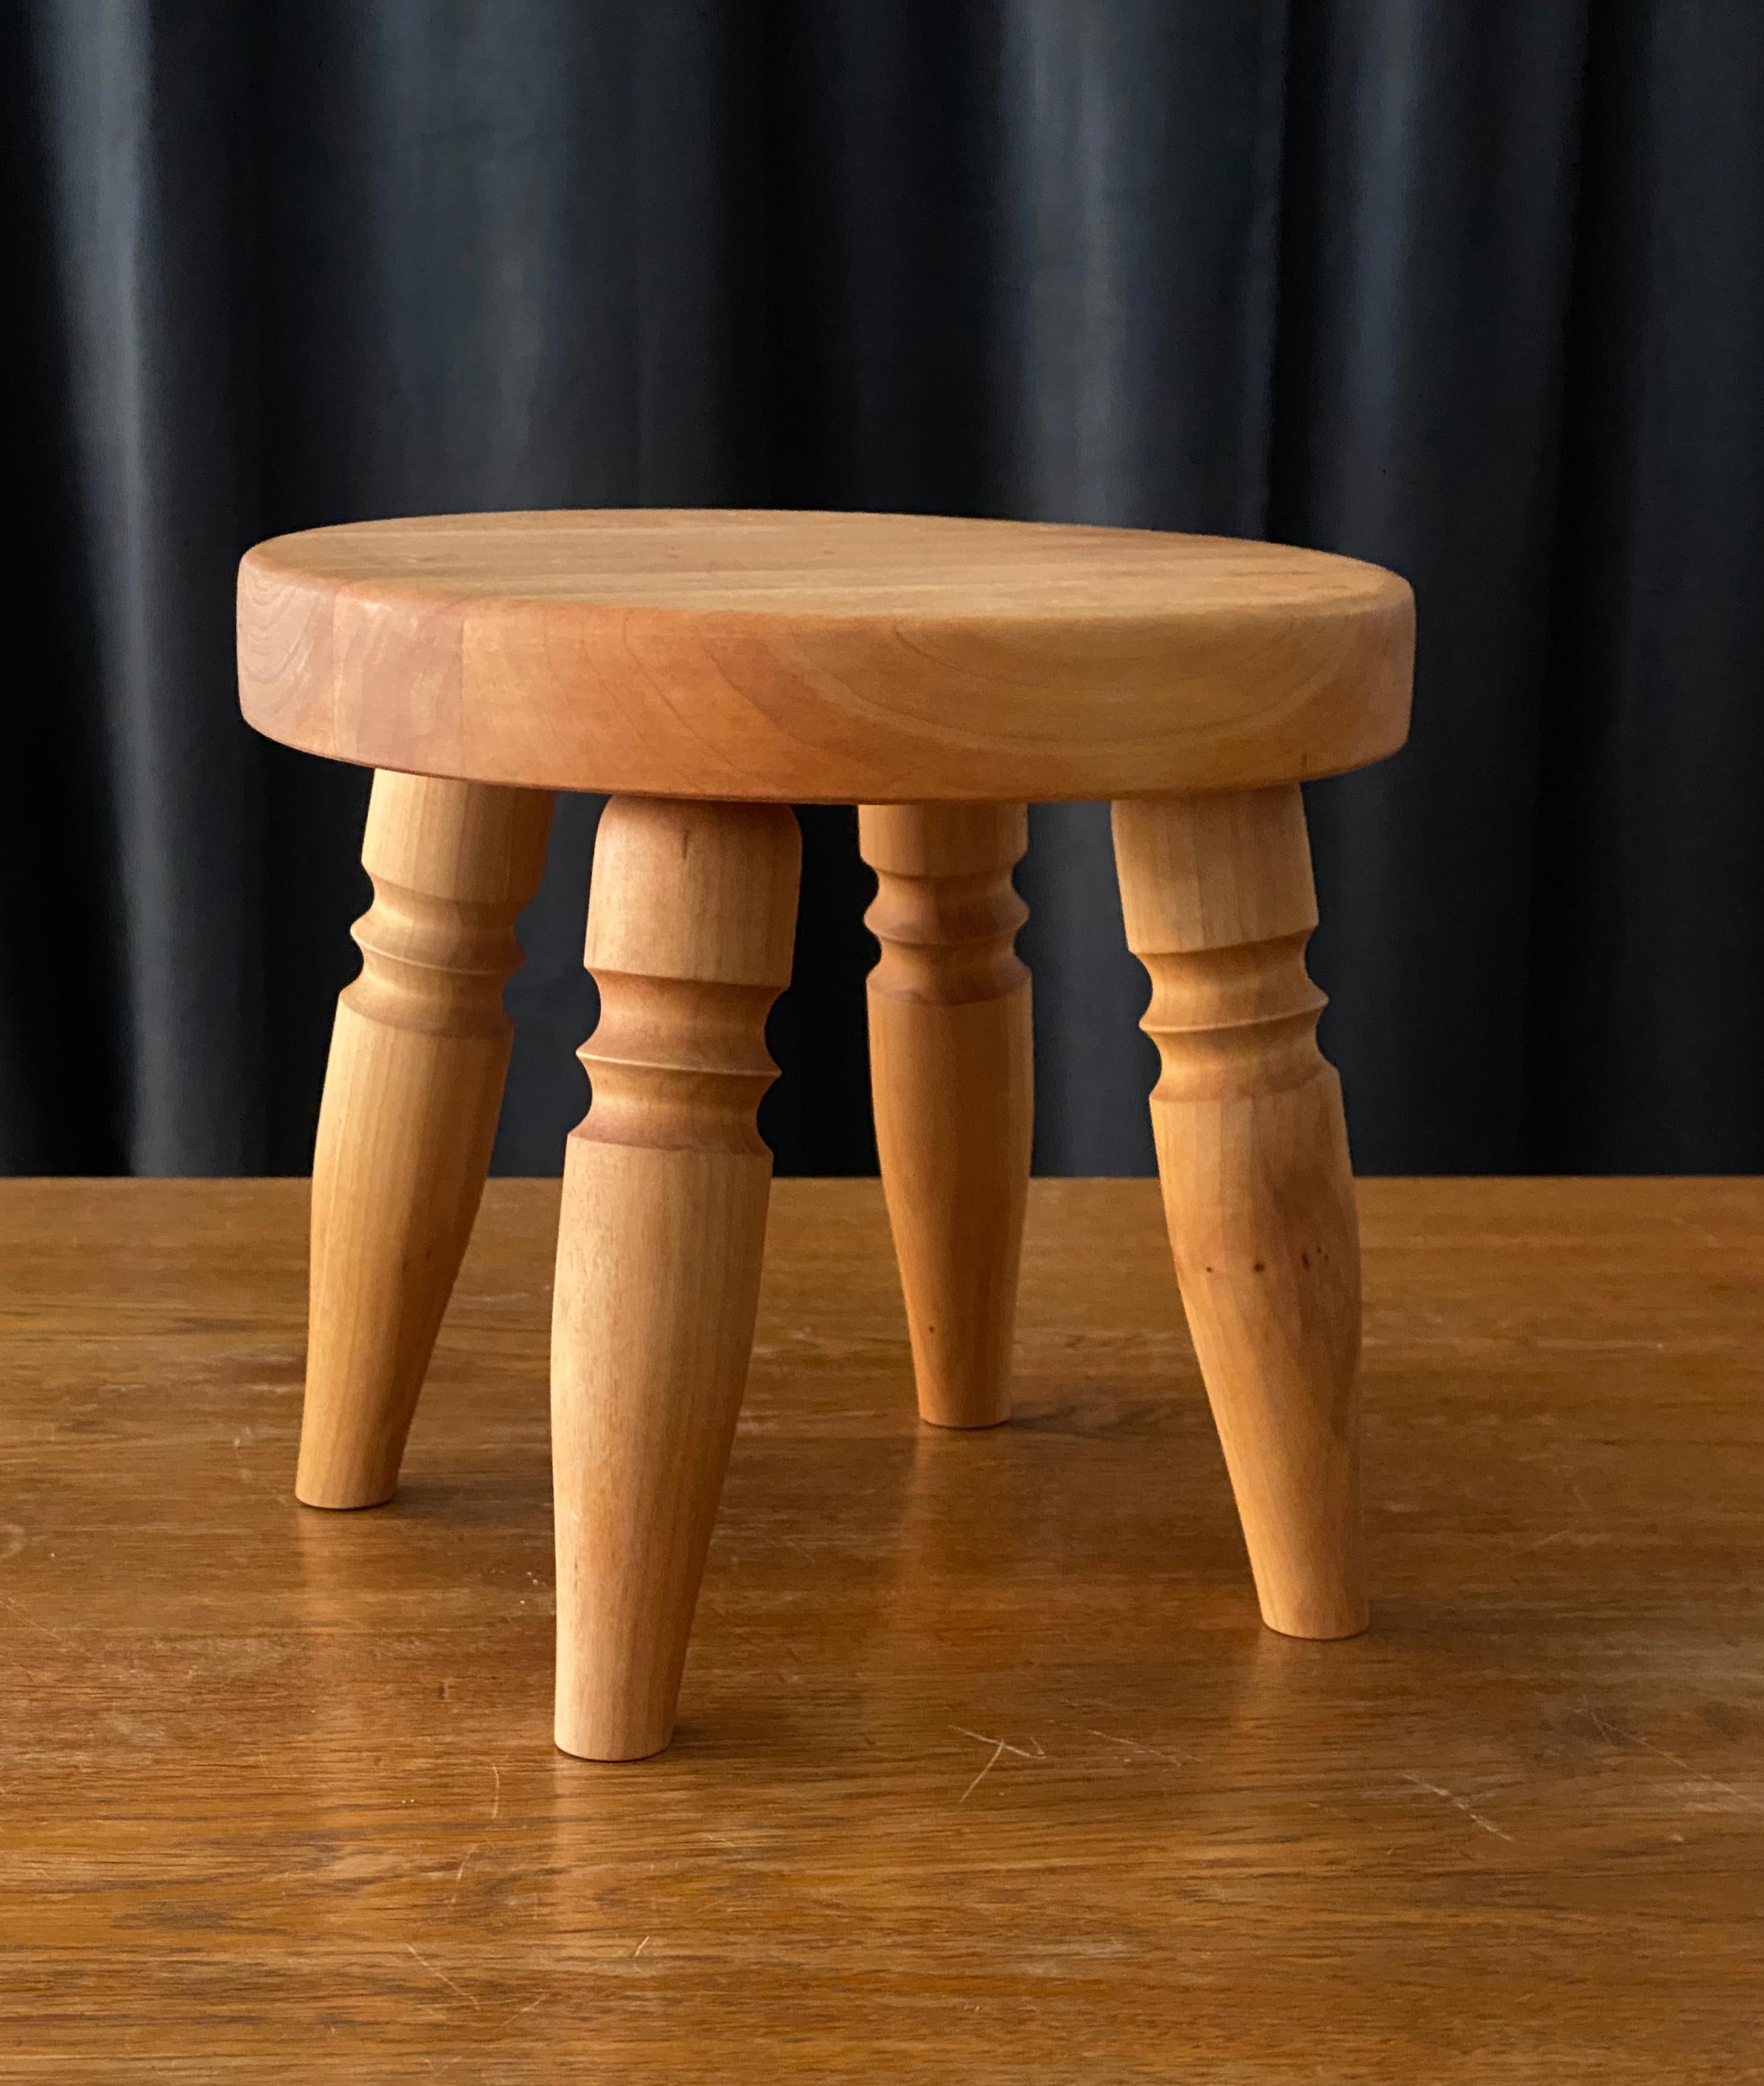 A very petit Minimalist stool, designed and produced in Sweden, 1970s. In pine with original lacquer. Finely carved details to legs. Can function as a piece of decor, side table, or to place a planter or vase atop. 

Other designers of the 20th